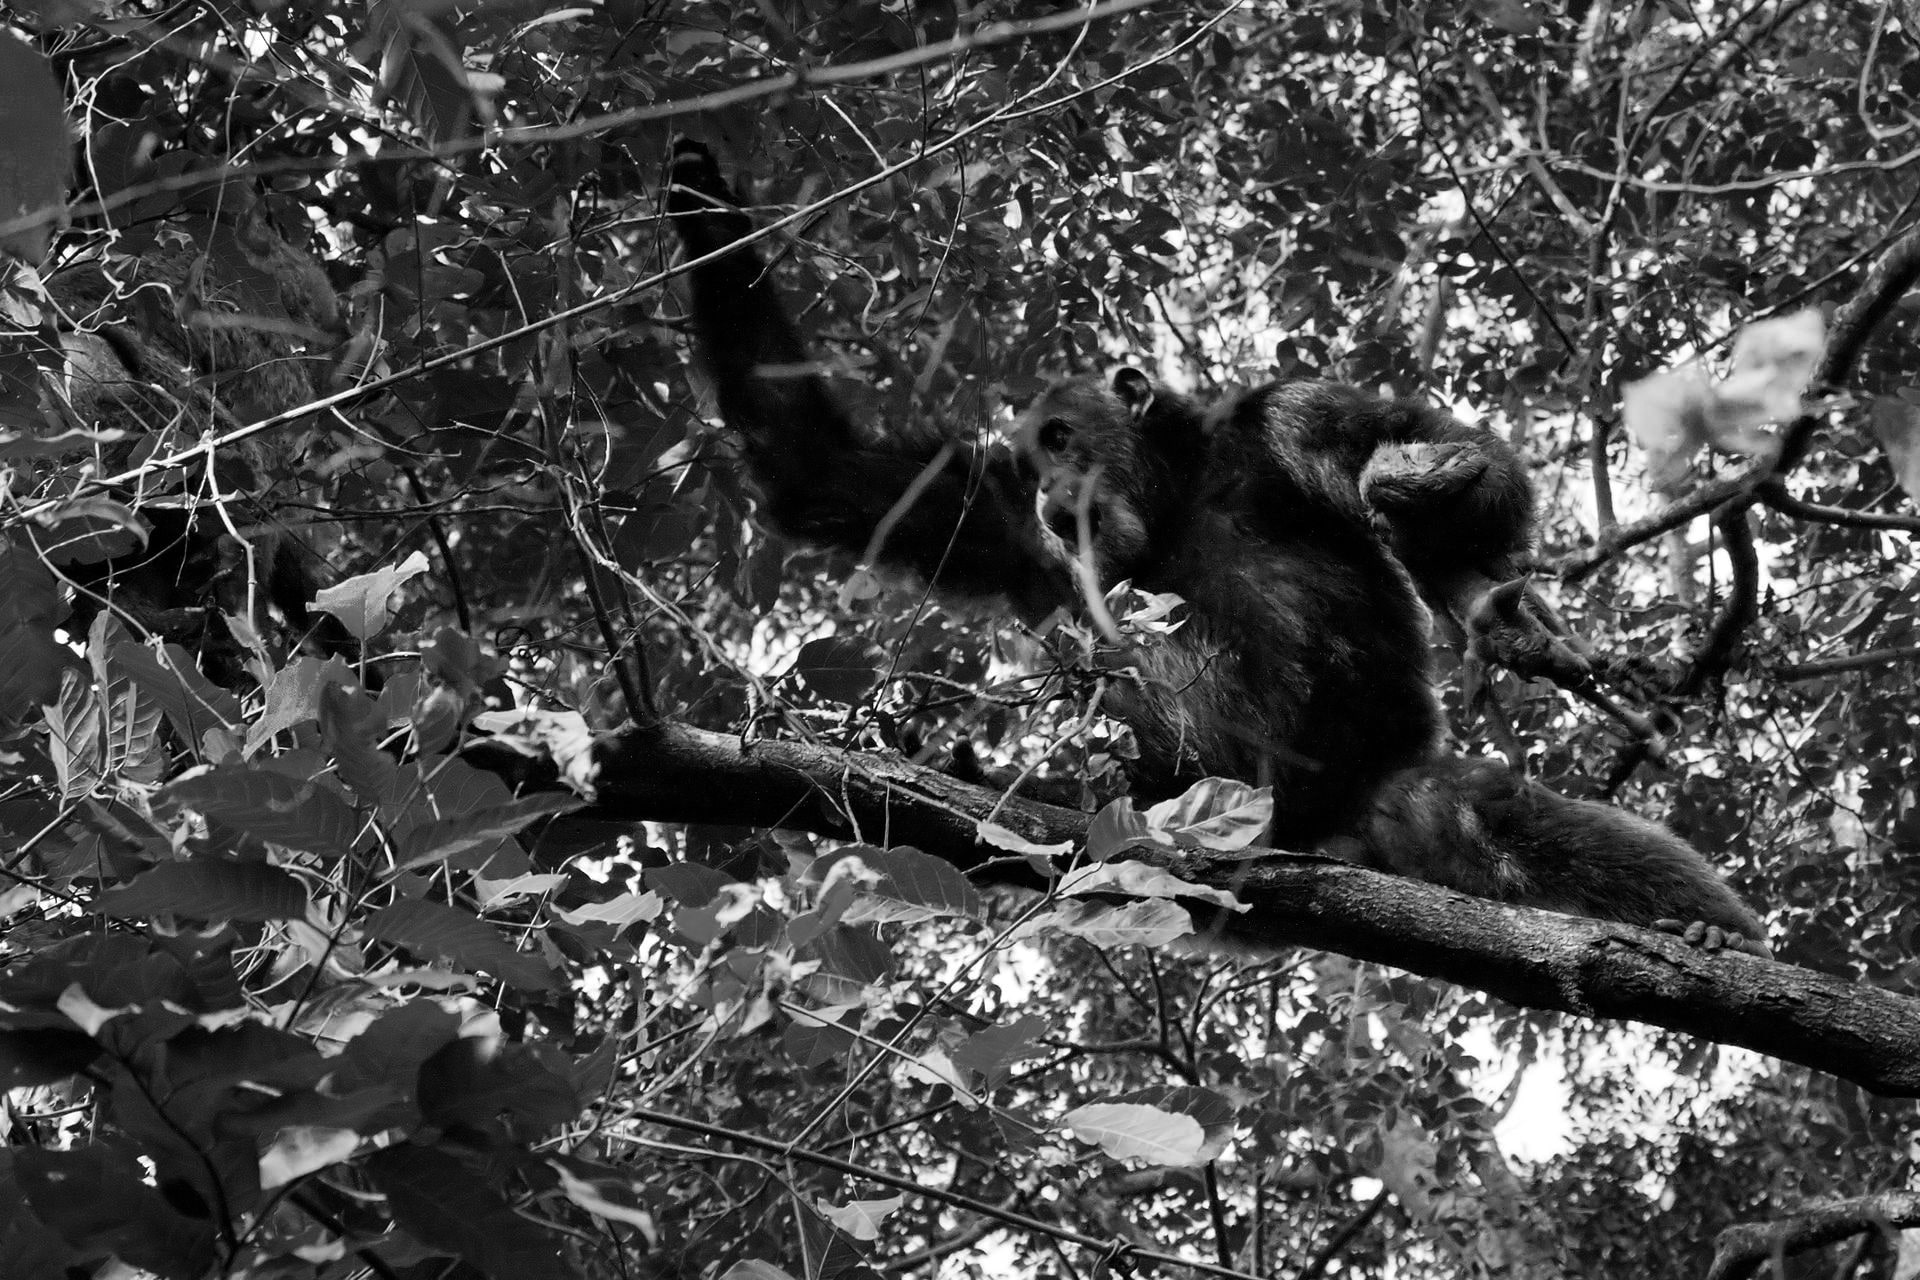 A chimpanzee hunting at Gombe National Park